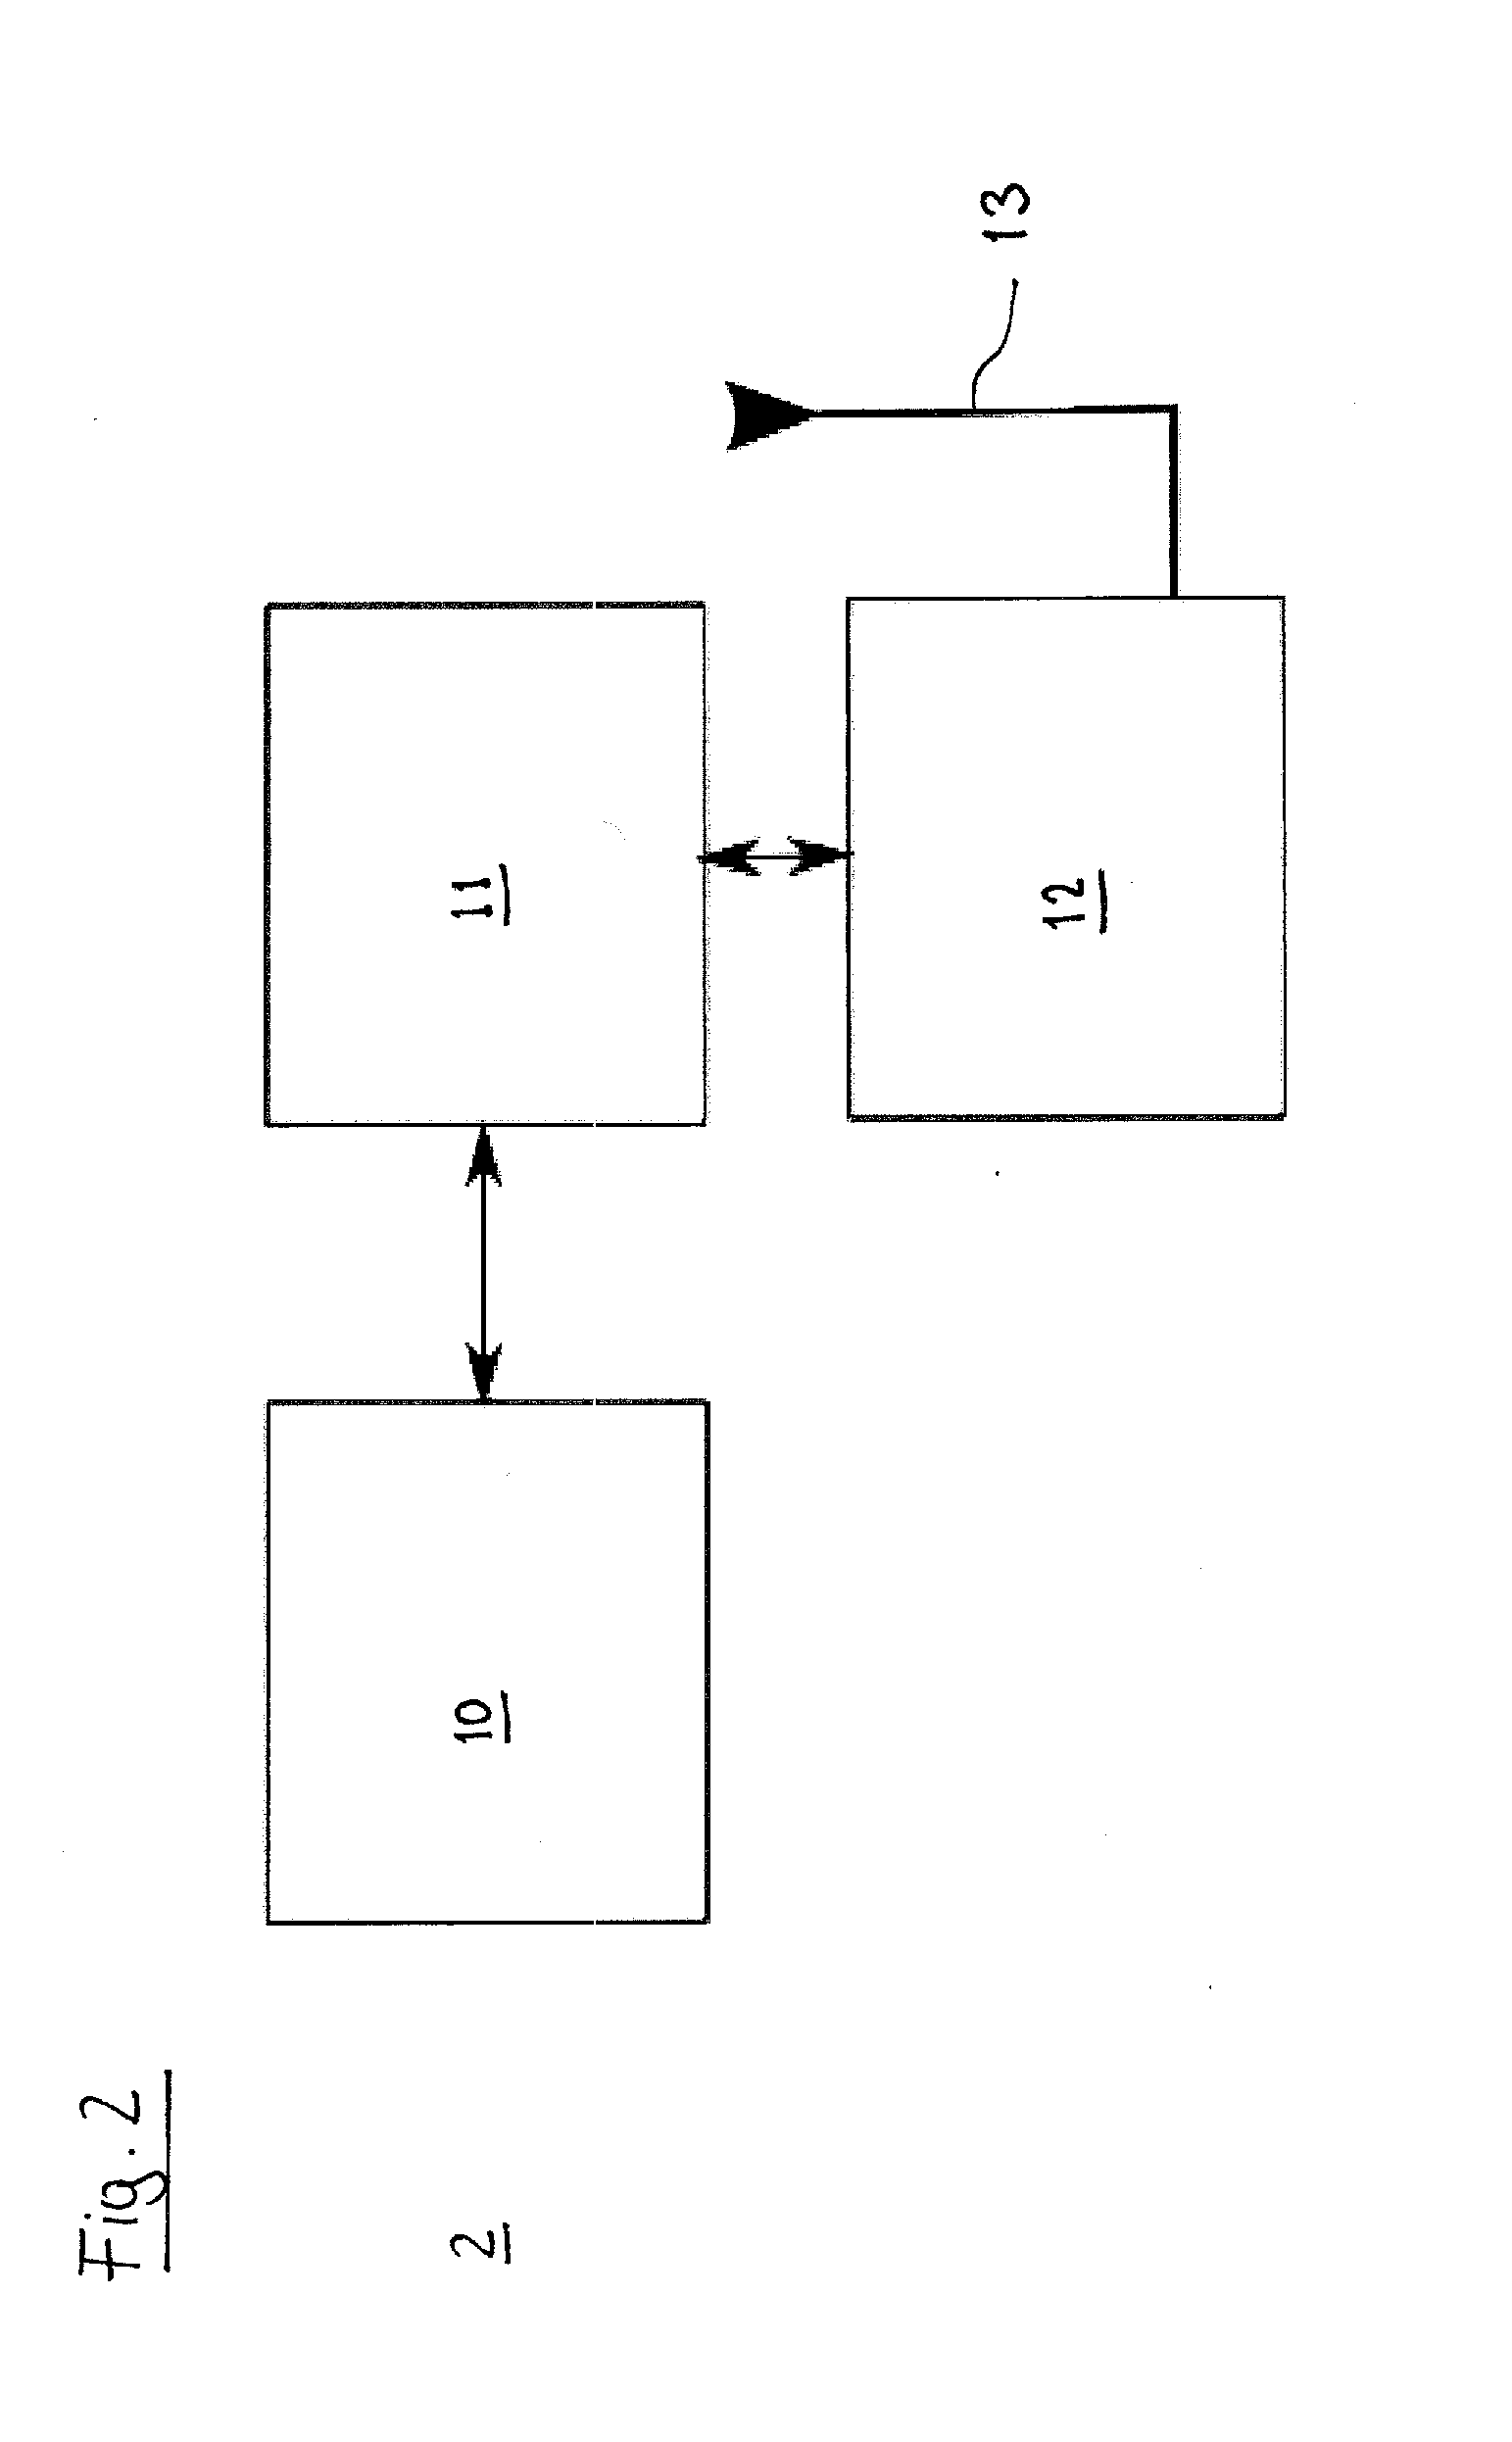 Imaging probe and method of obtaining position and/or orientation information